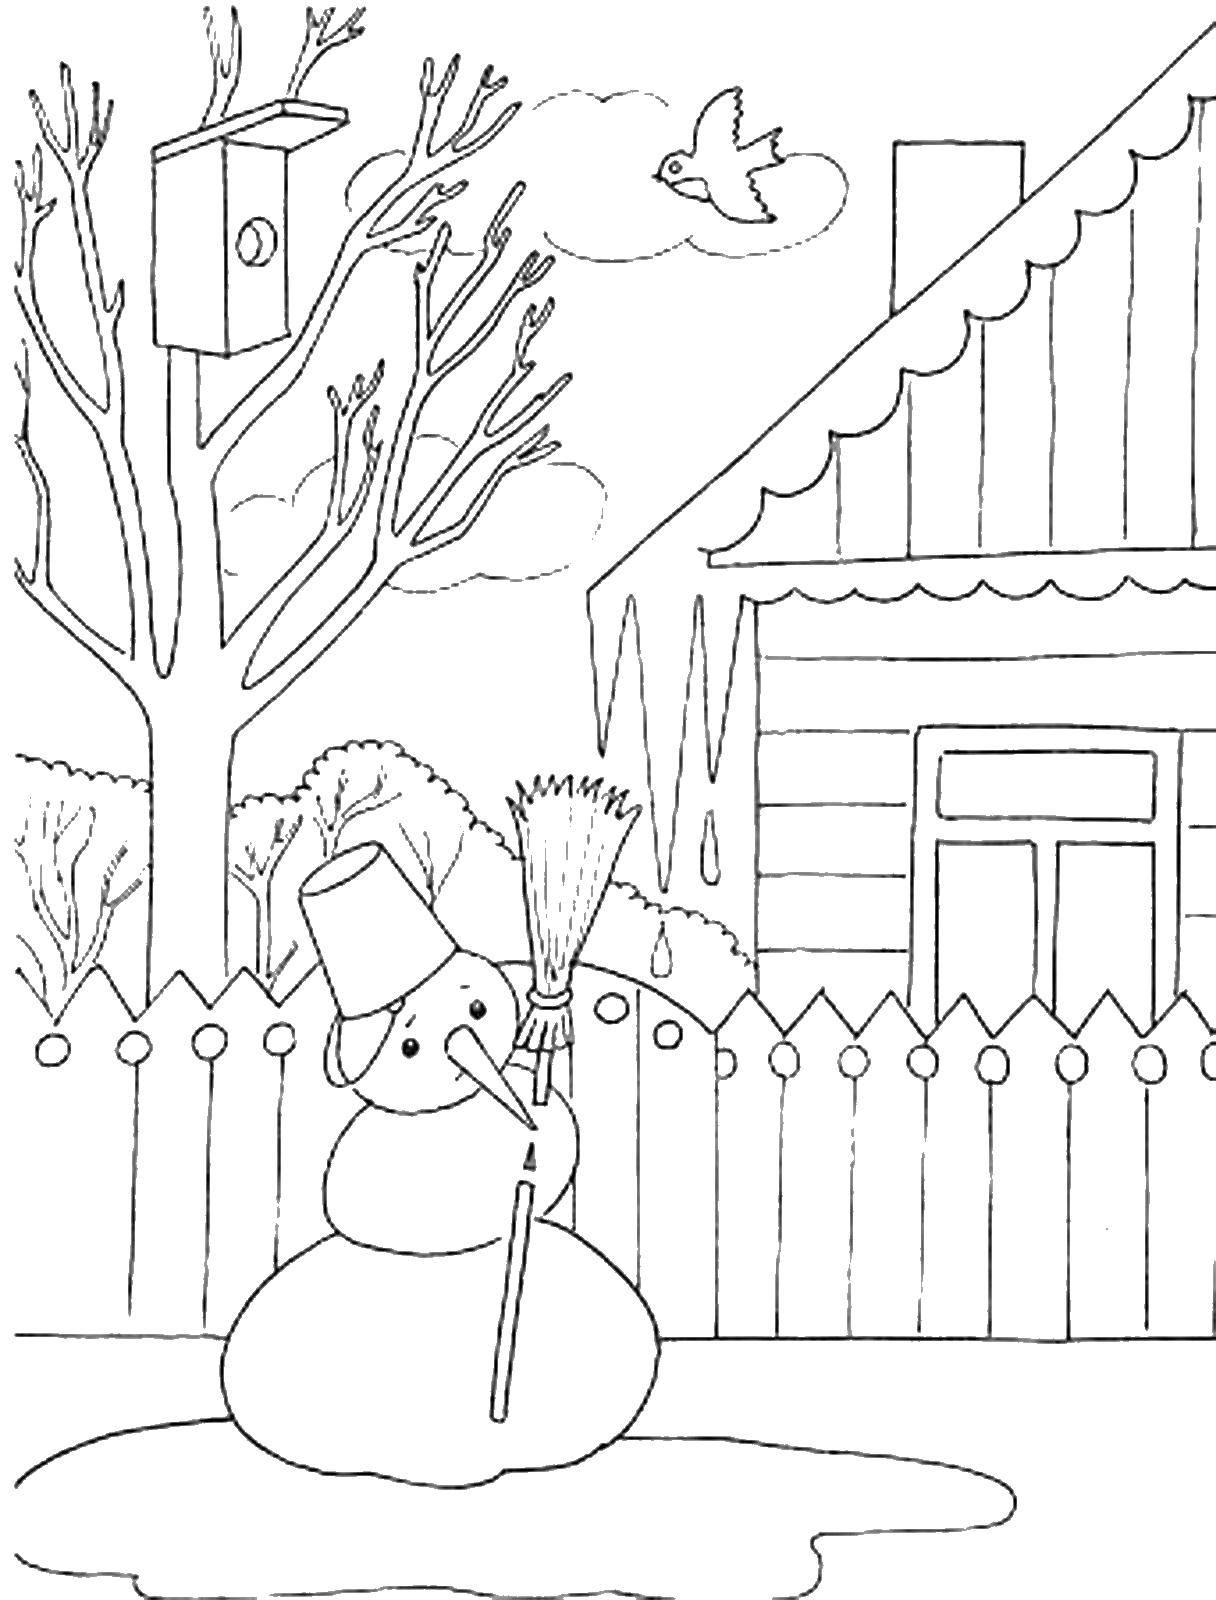 Coloring Snowman in spring. Category spring. Tags:  snowman.